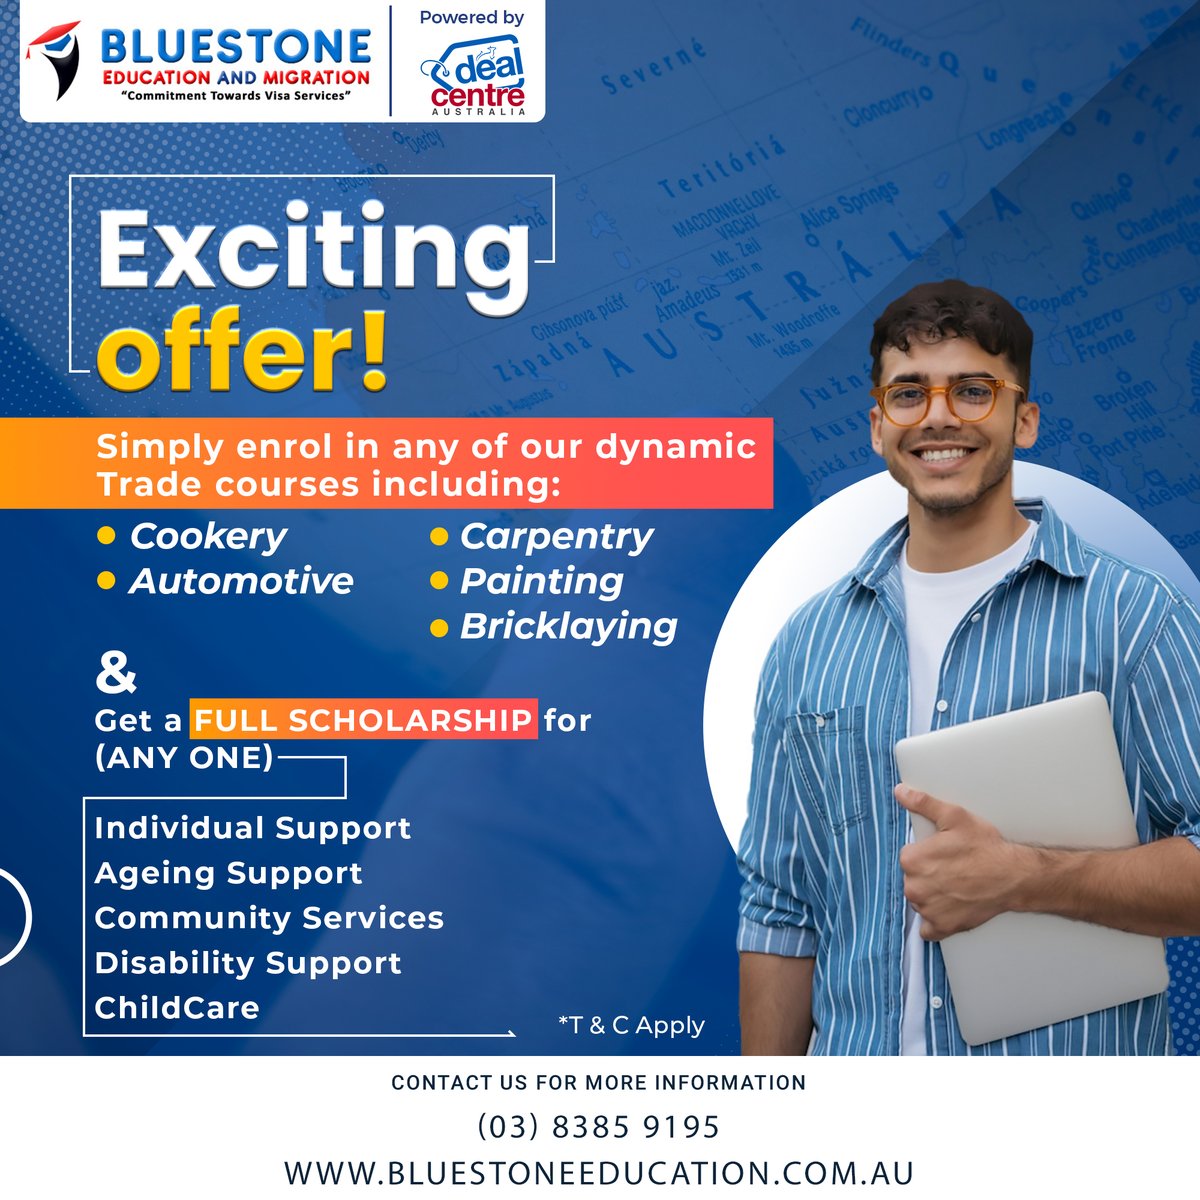 Grab this opportunity now! 

Book an appointment: +61 (03) 8385 9195

#cookery #automotive #carpentry #painting #bricklaying #individualsupport #ageingsupport #CommunityServices #bluestoneeducationandmigration #education